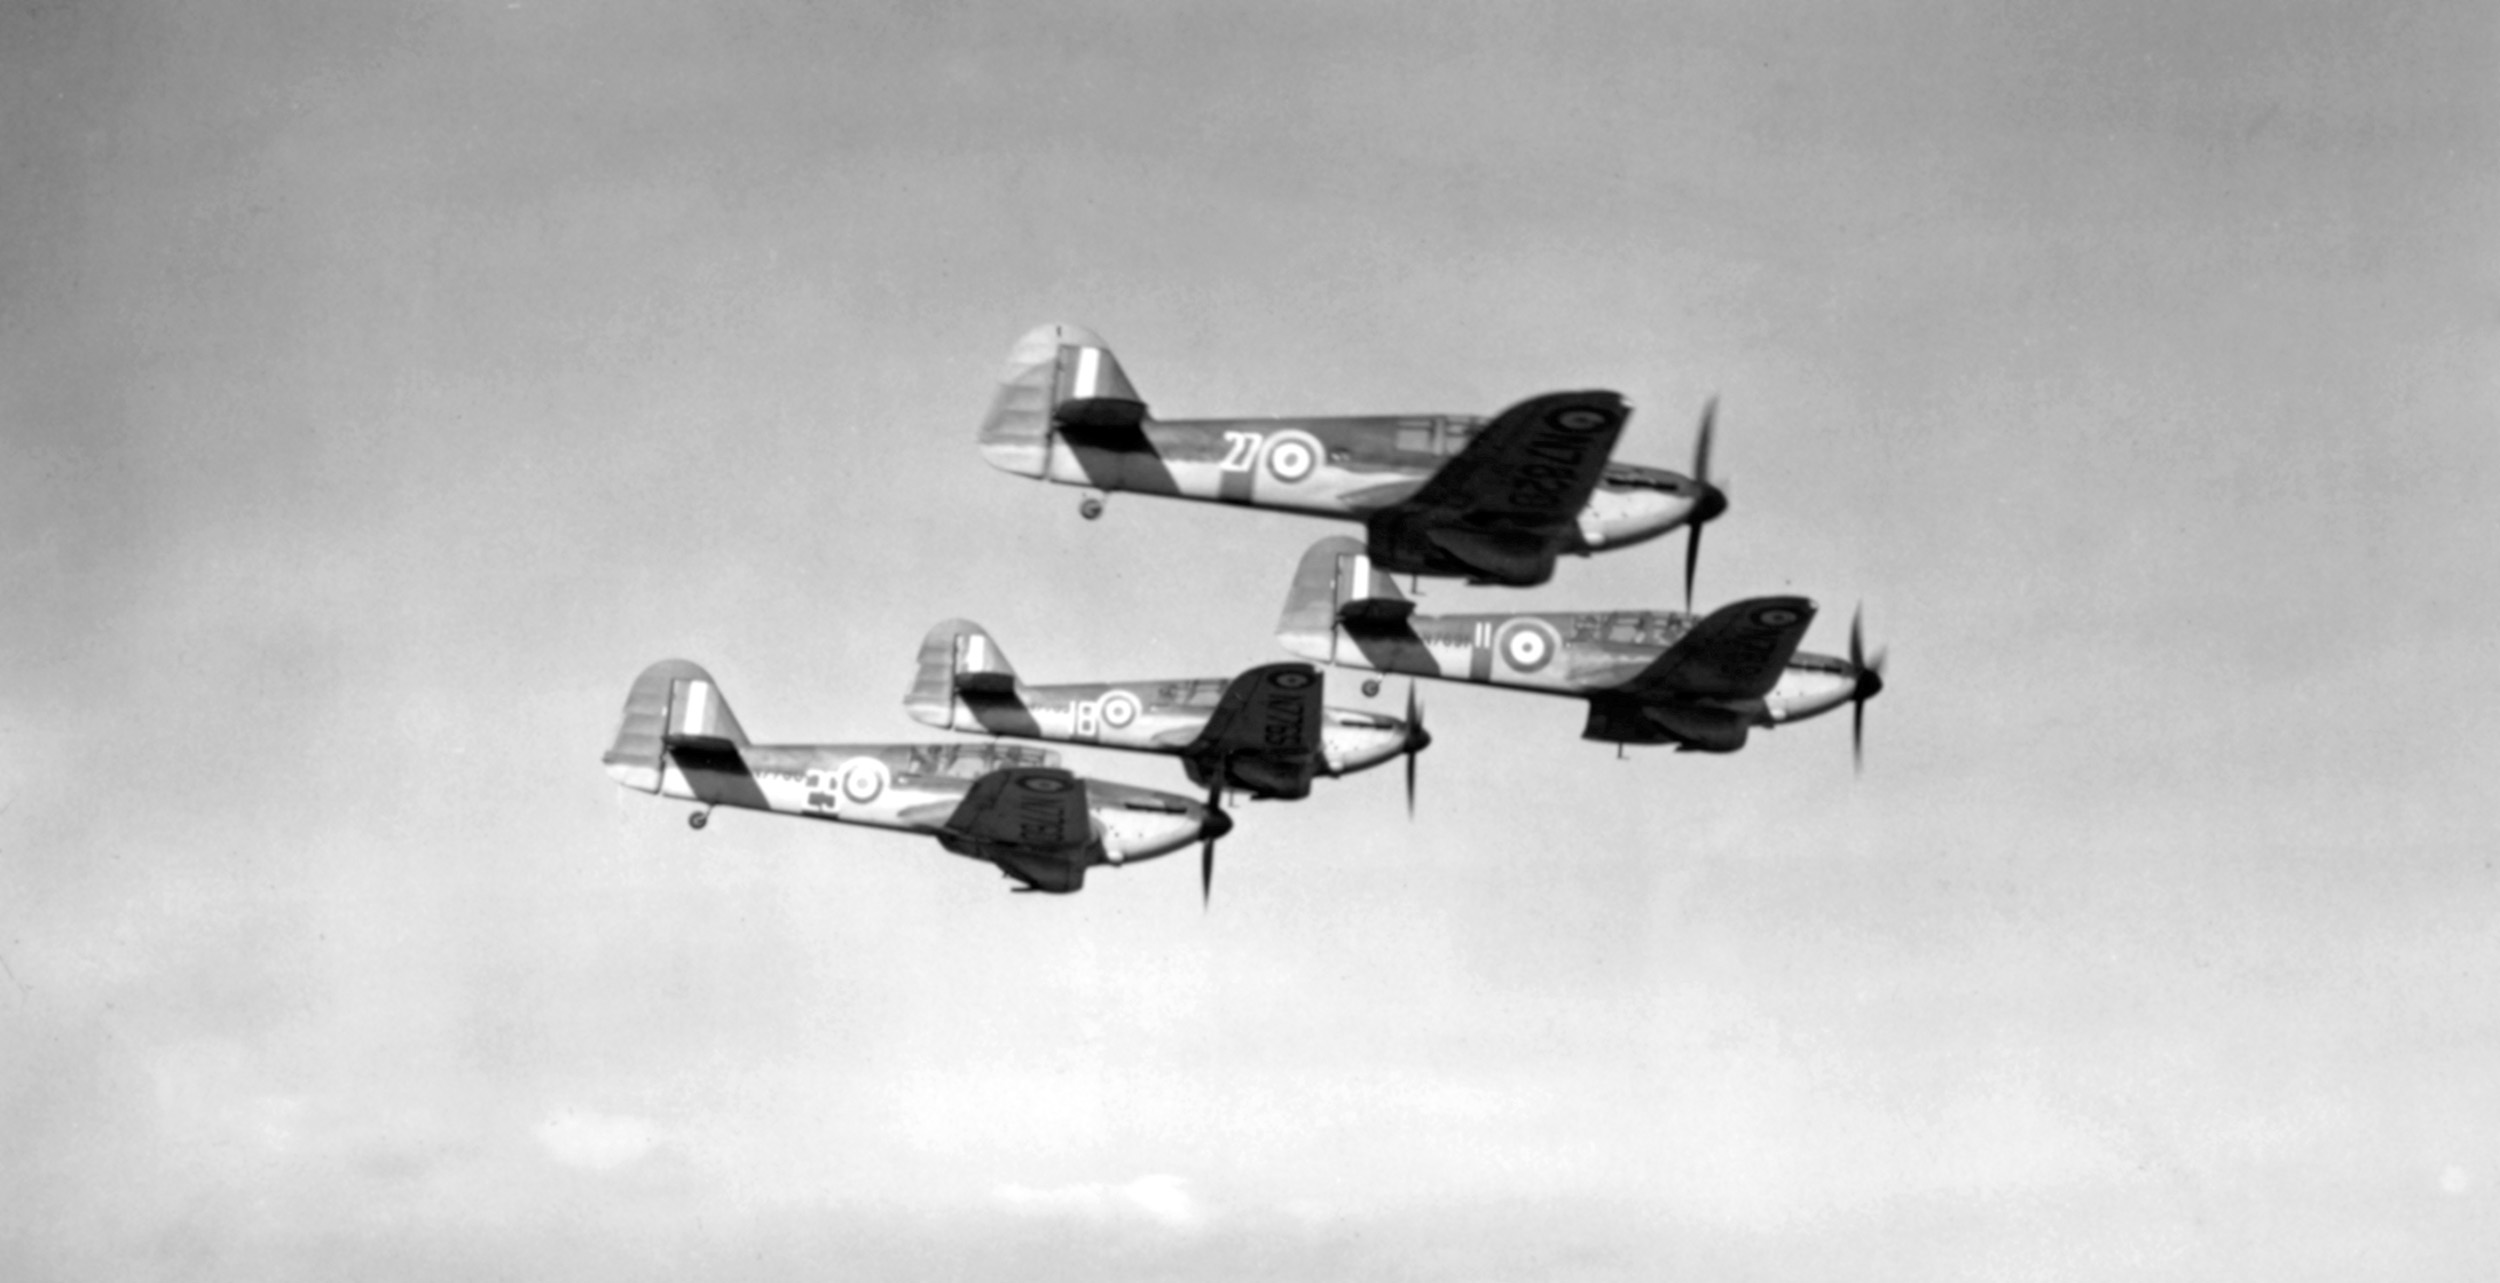 Prospective Eagle Squadron pilots were required to undergo standard RAF flight training even though they already held certifications. In this photo American pilots fly trainers in formation above an RAF flight training school.